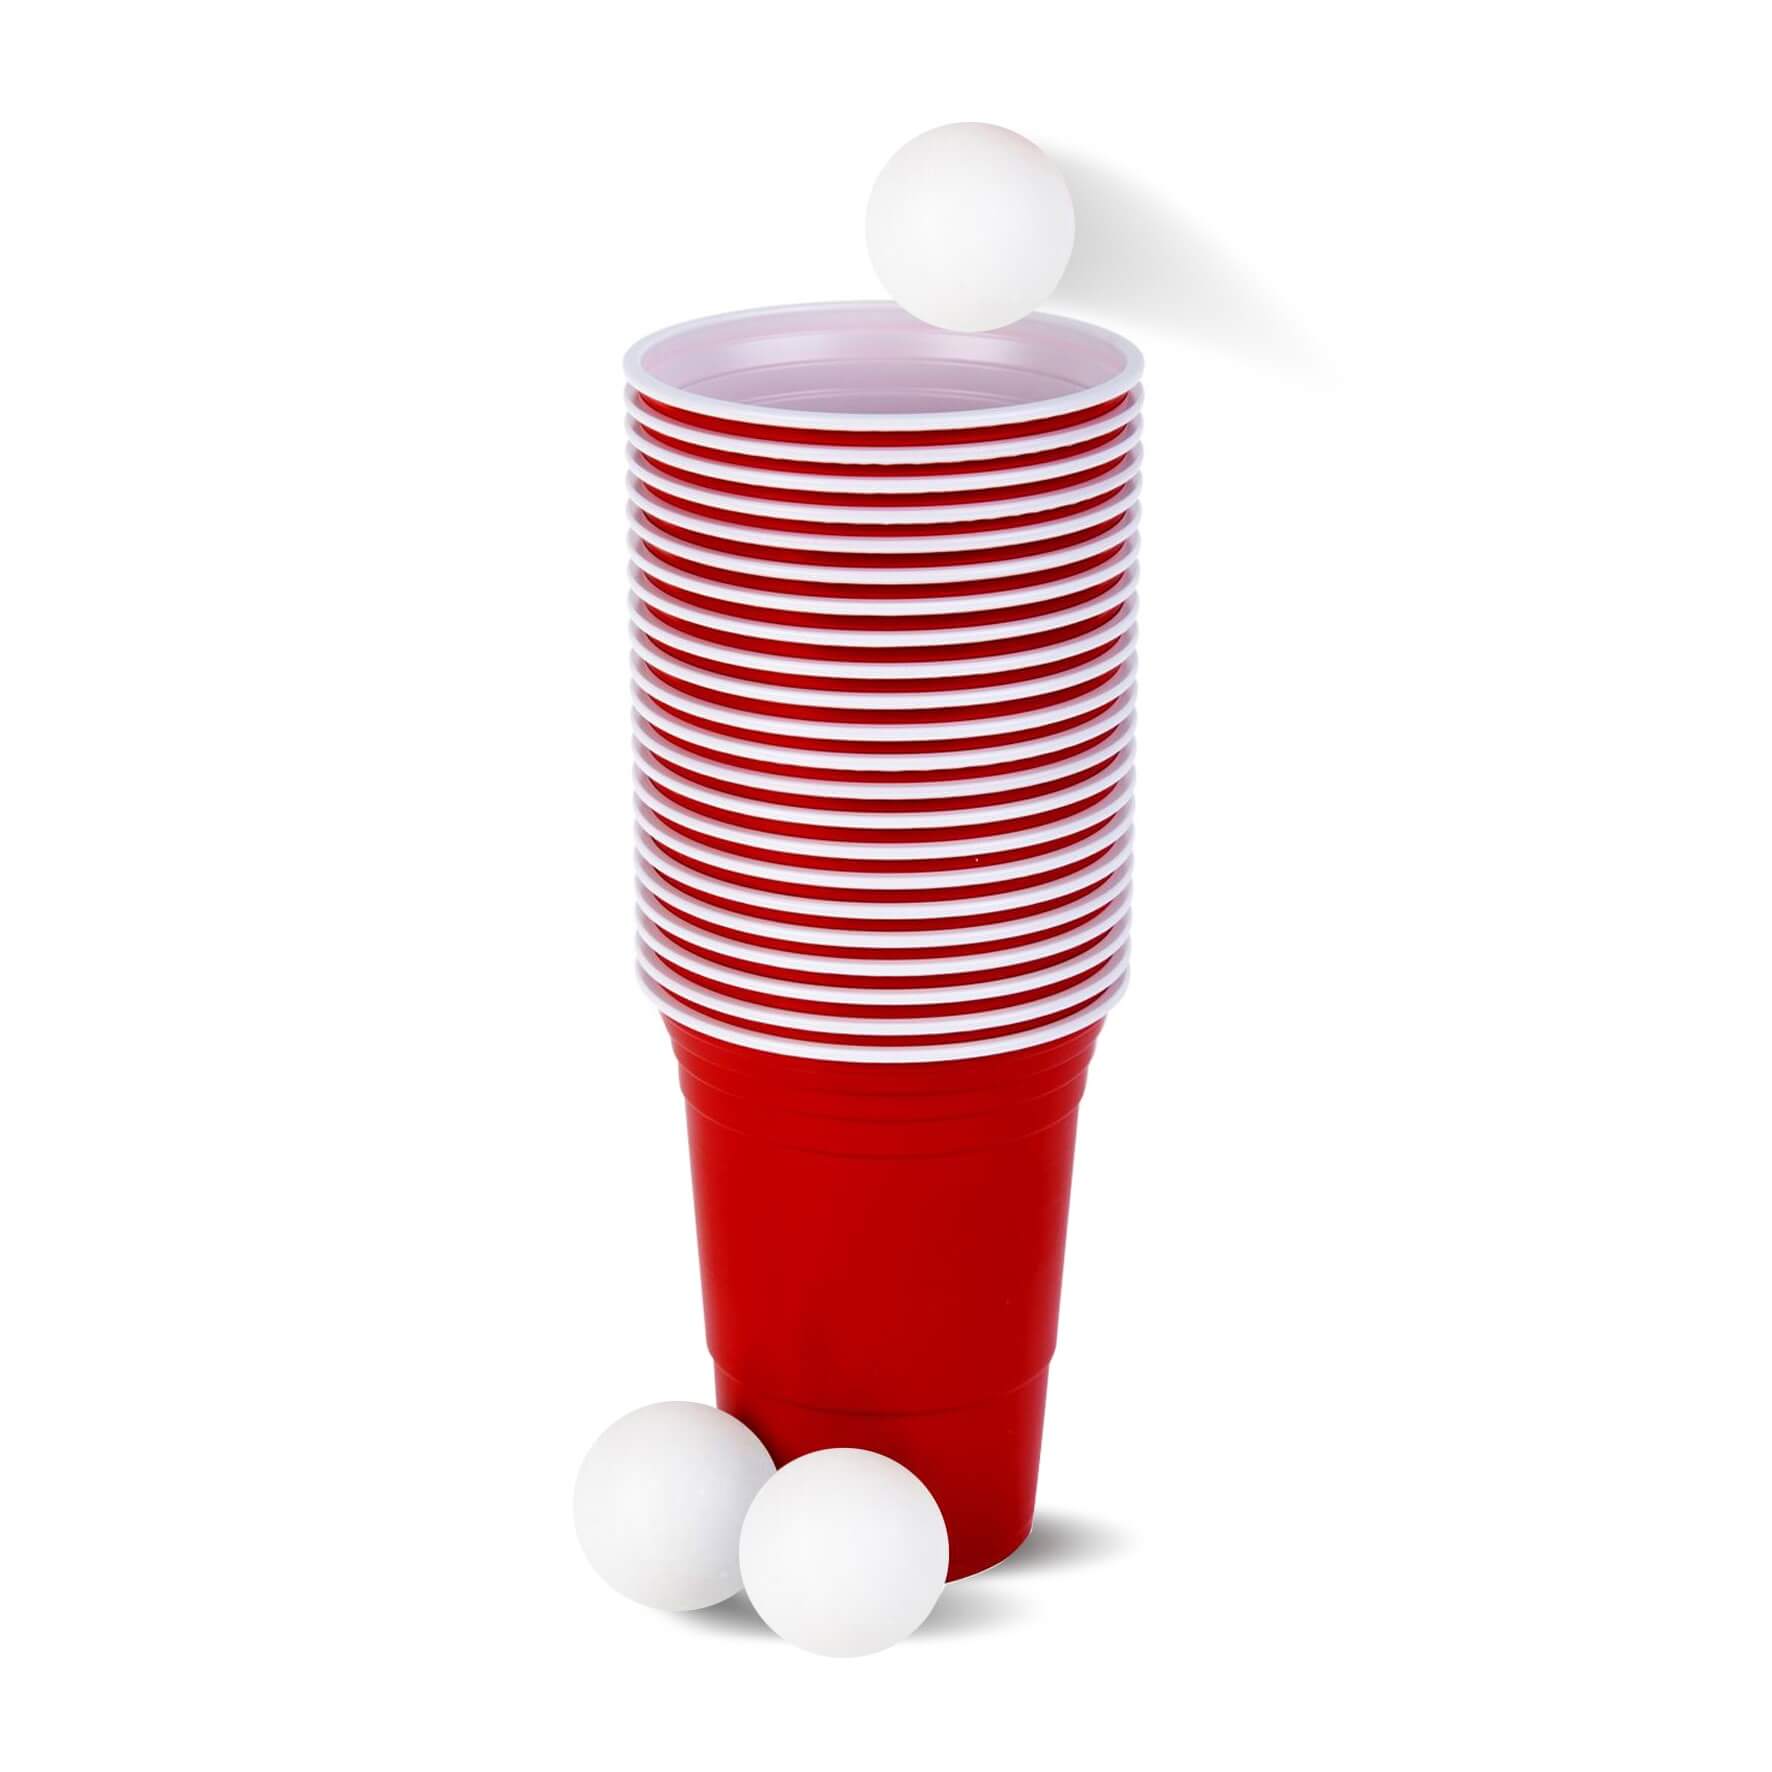 beer pong game